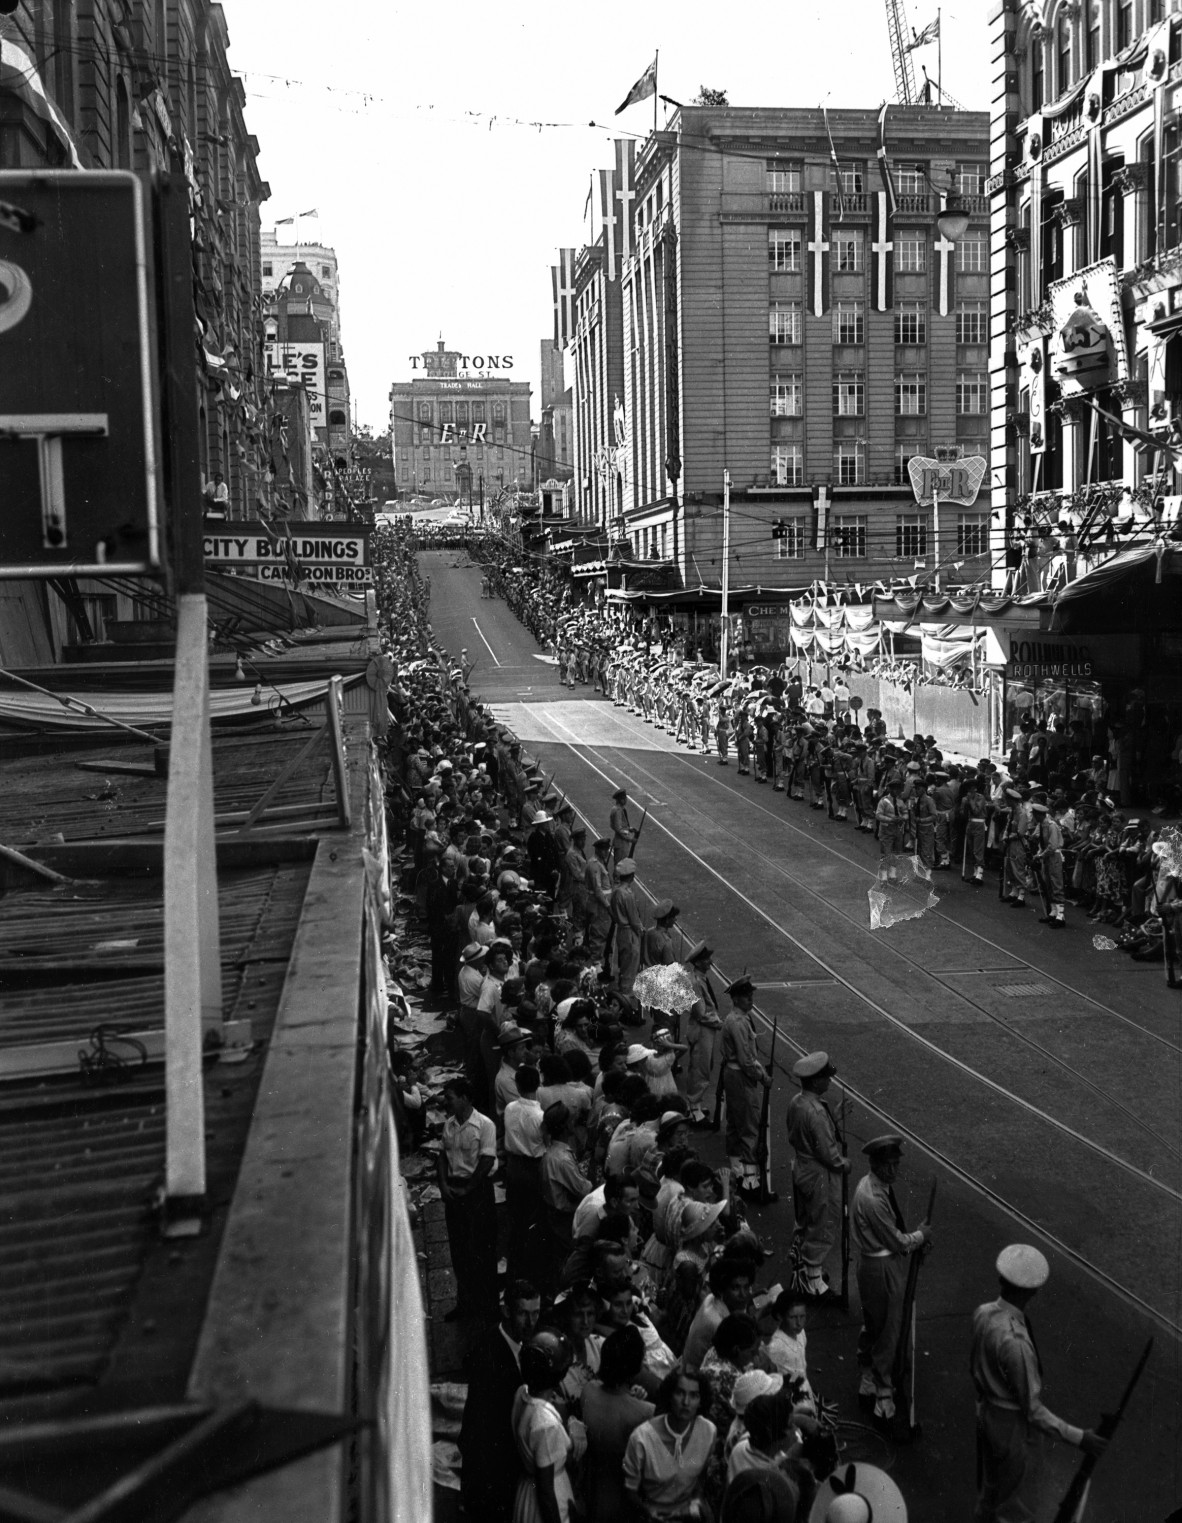 Black and white photograph of crowds lining Edward Street, Brisbane City for Royal Visit. Tritton's sign visible atop one of the buildings. 